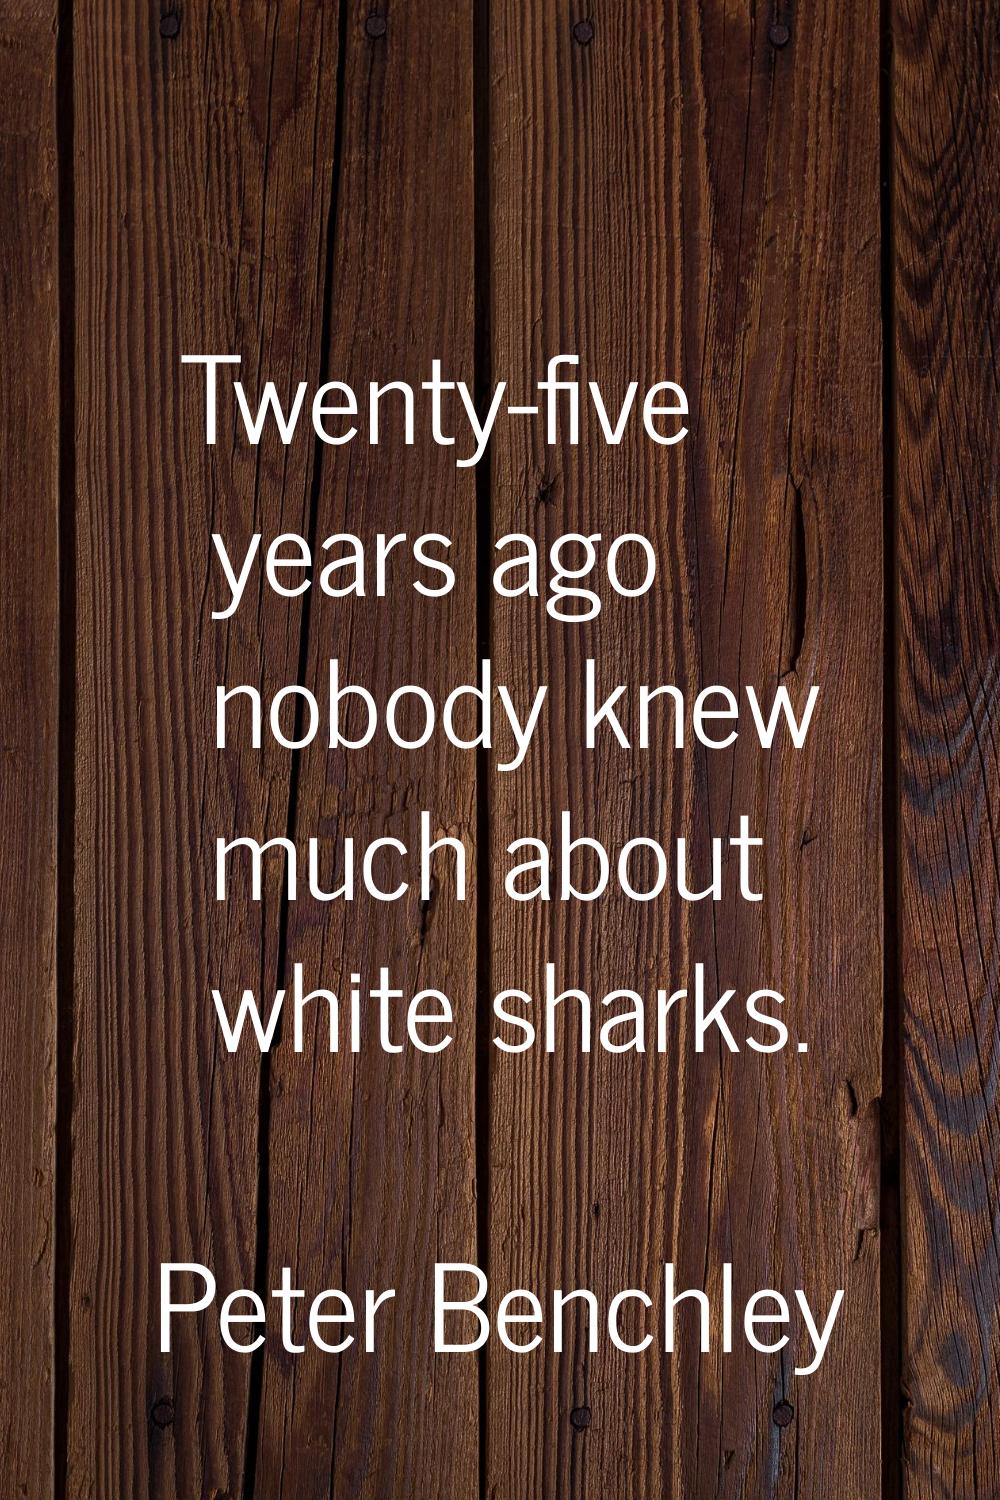 Twenty-five years ago nobody knew much about white sharks.